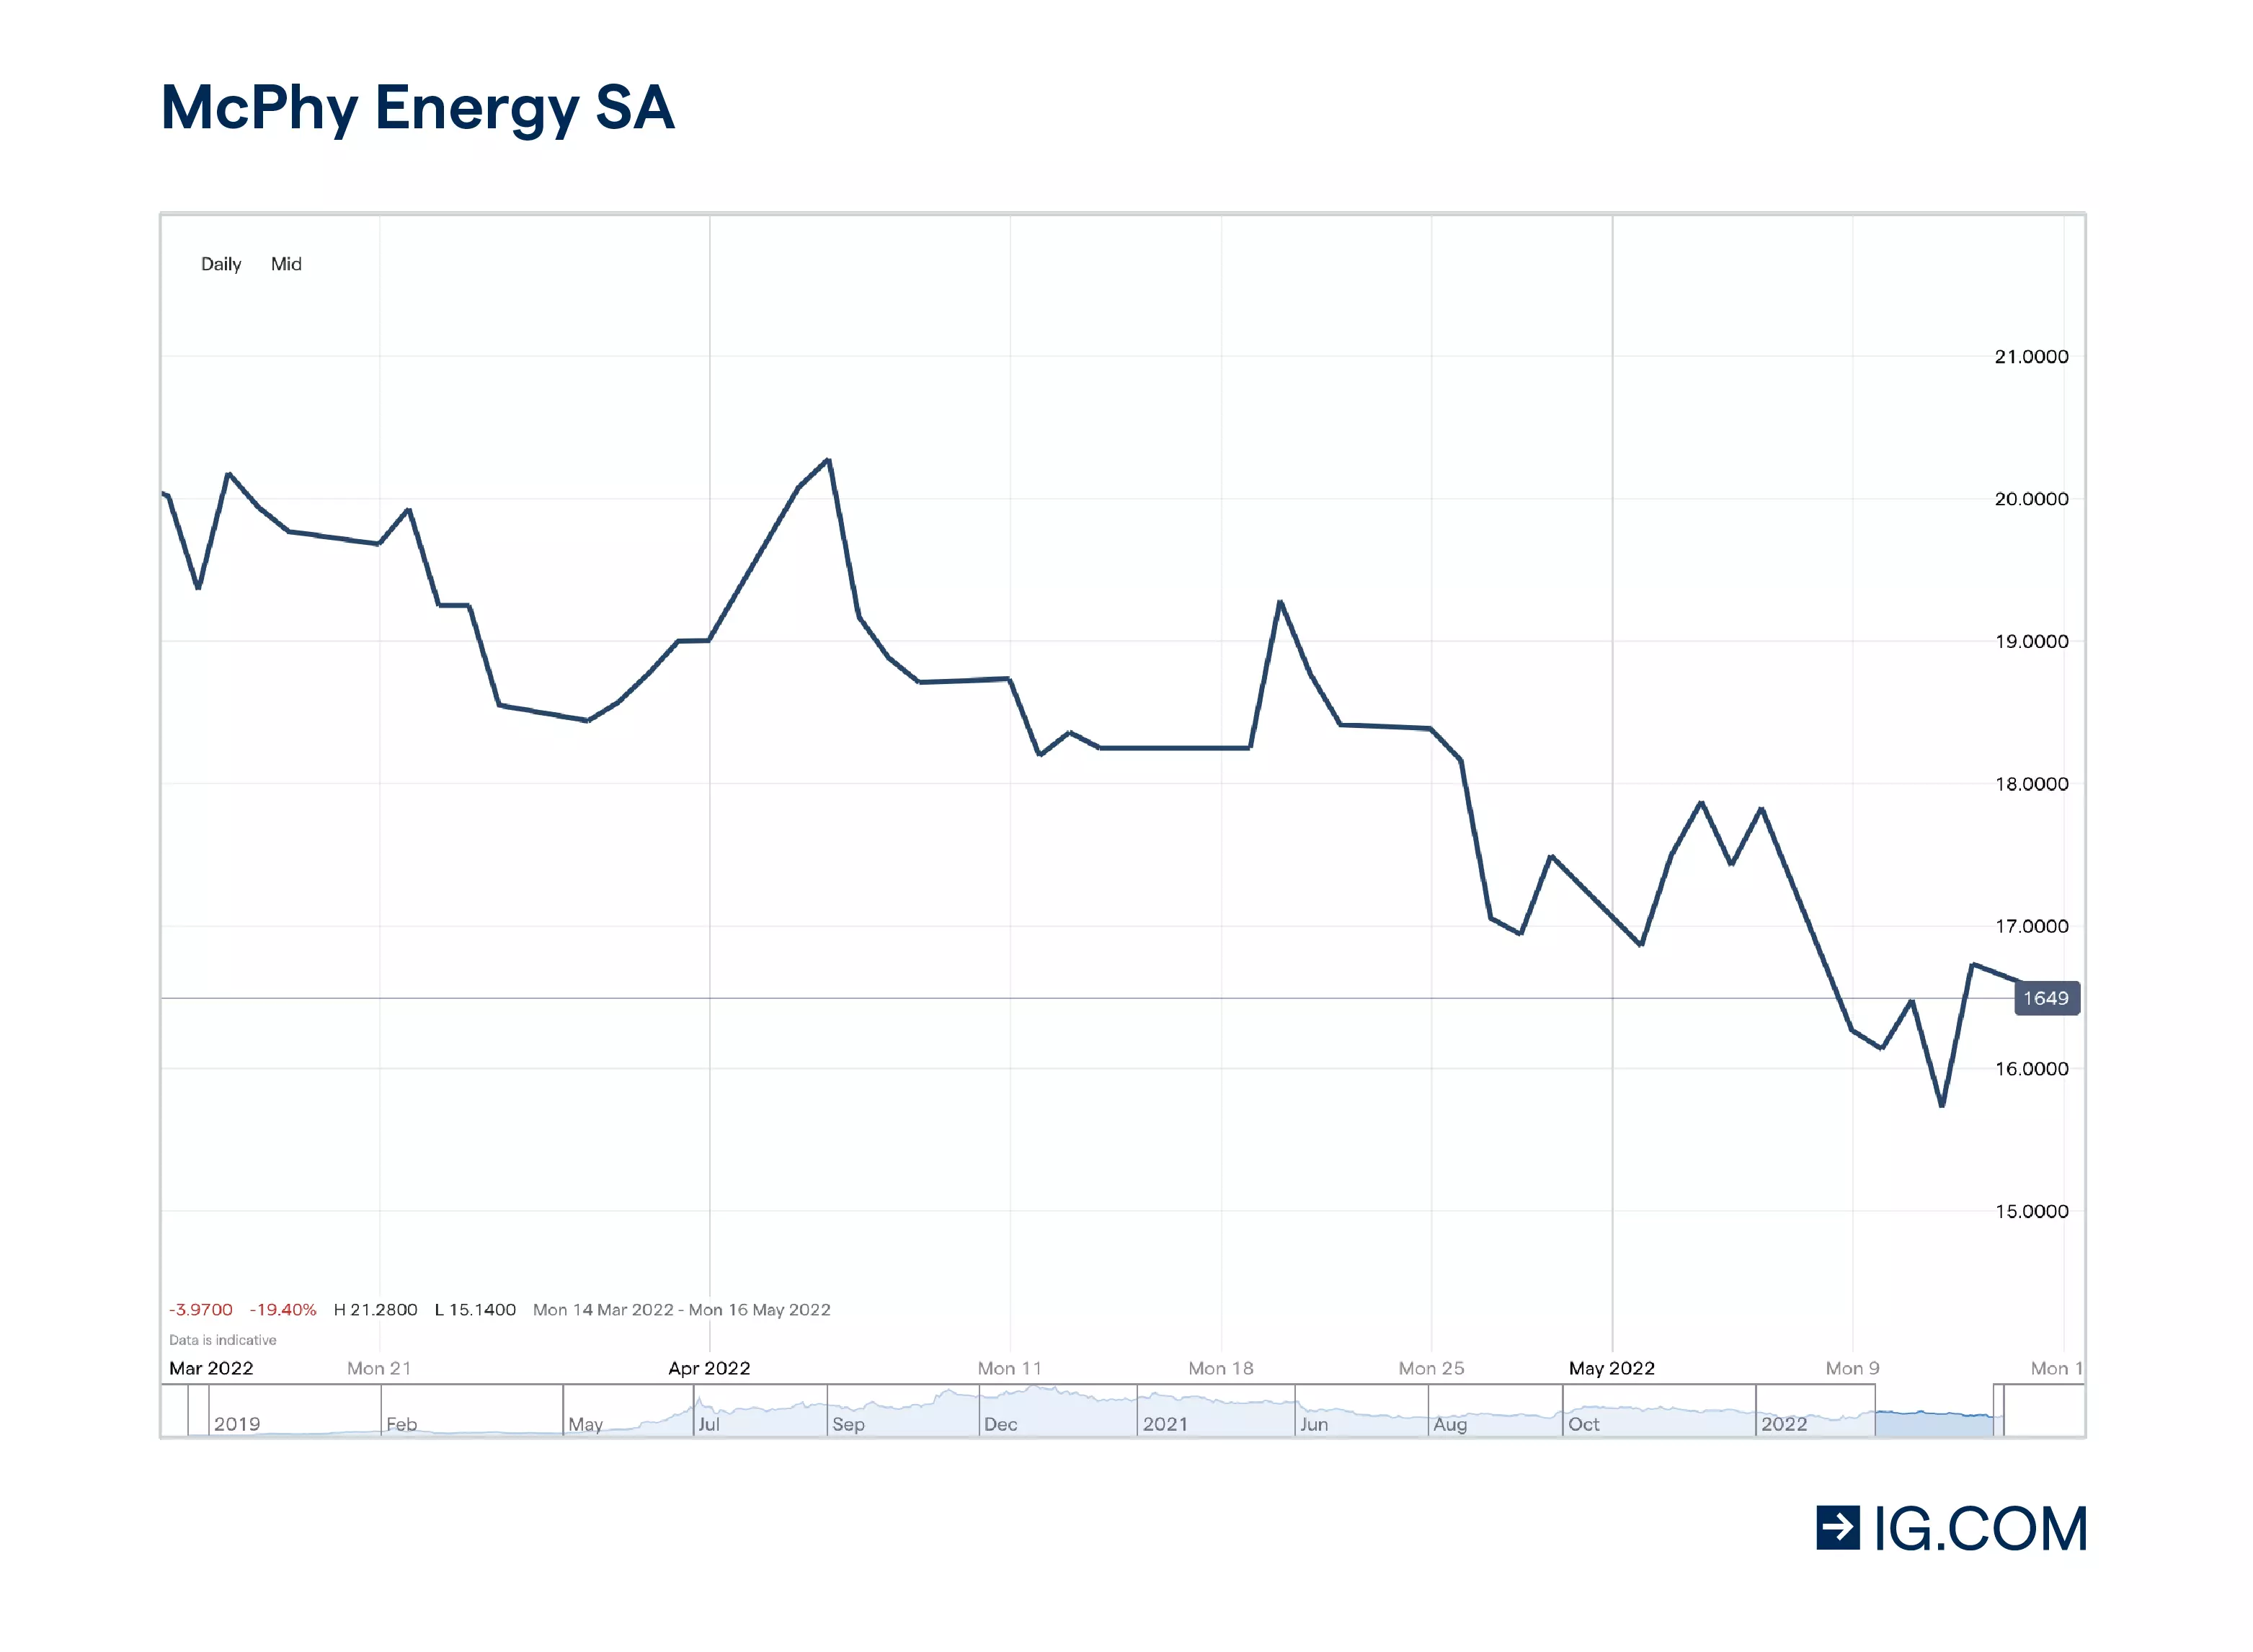 McPhy Energy price chart showing the how the stock has declined from $31.83 a year prior to $18.40 per share